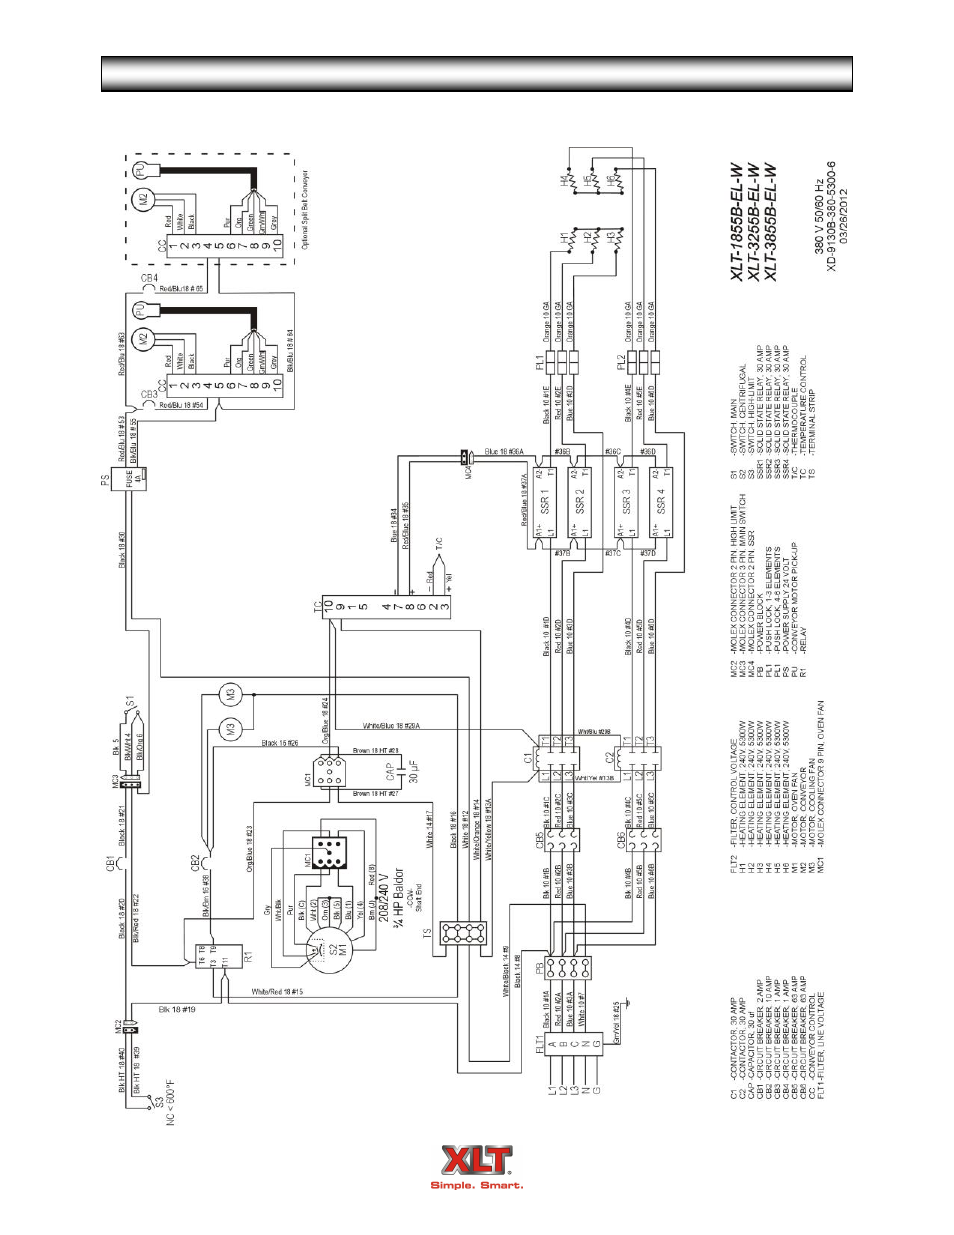 Oven schematic - world | XLT XD-9007A (ELEC Oven Version – B1, AVI Hood Version – B) User Manual | Page 52 / 56